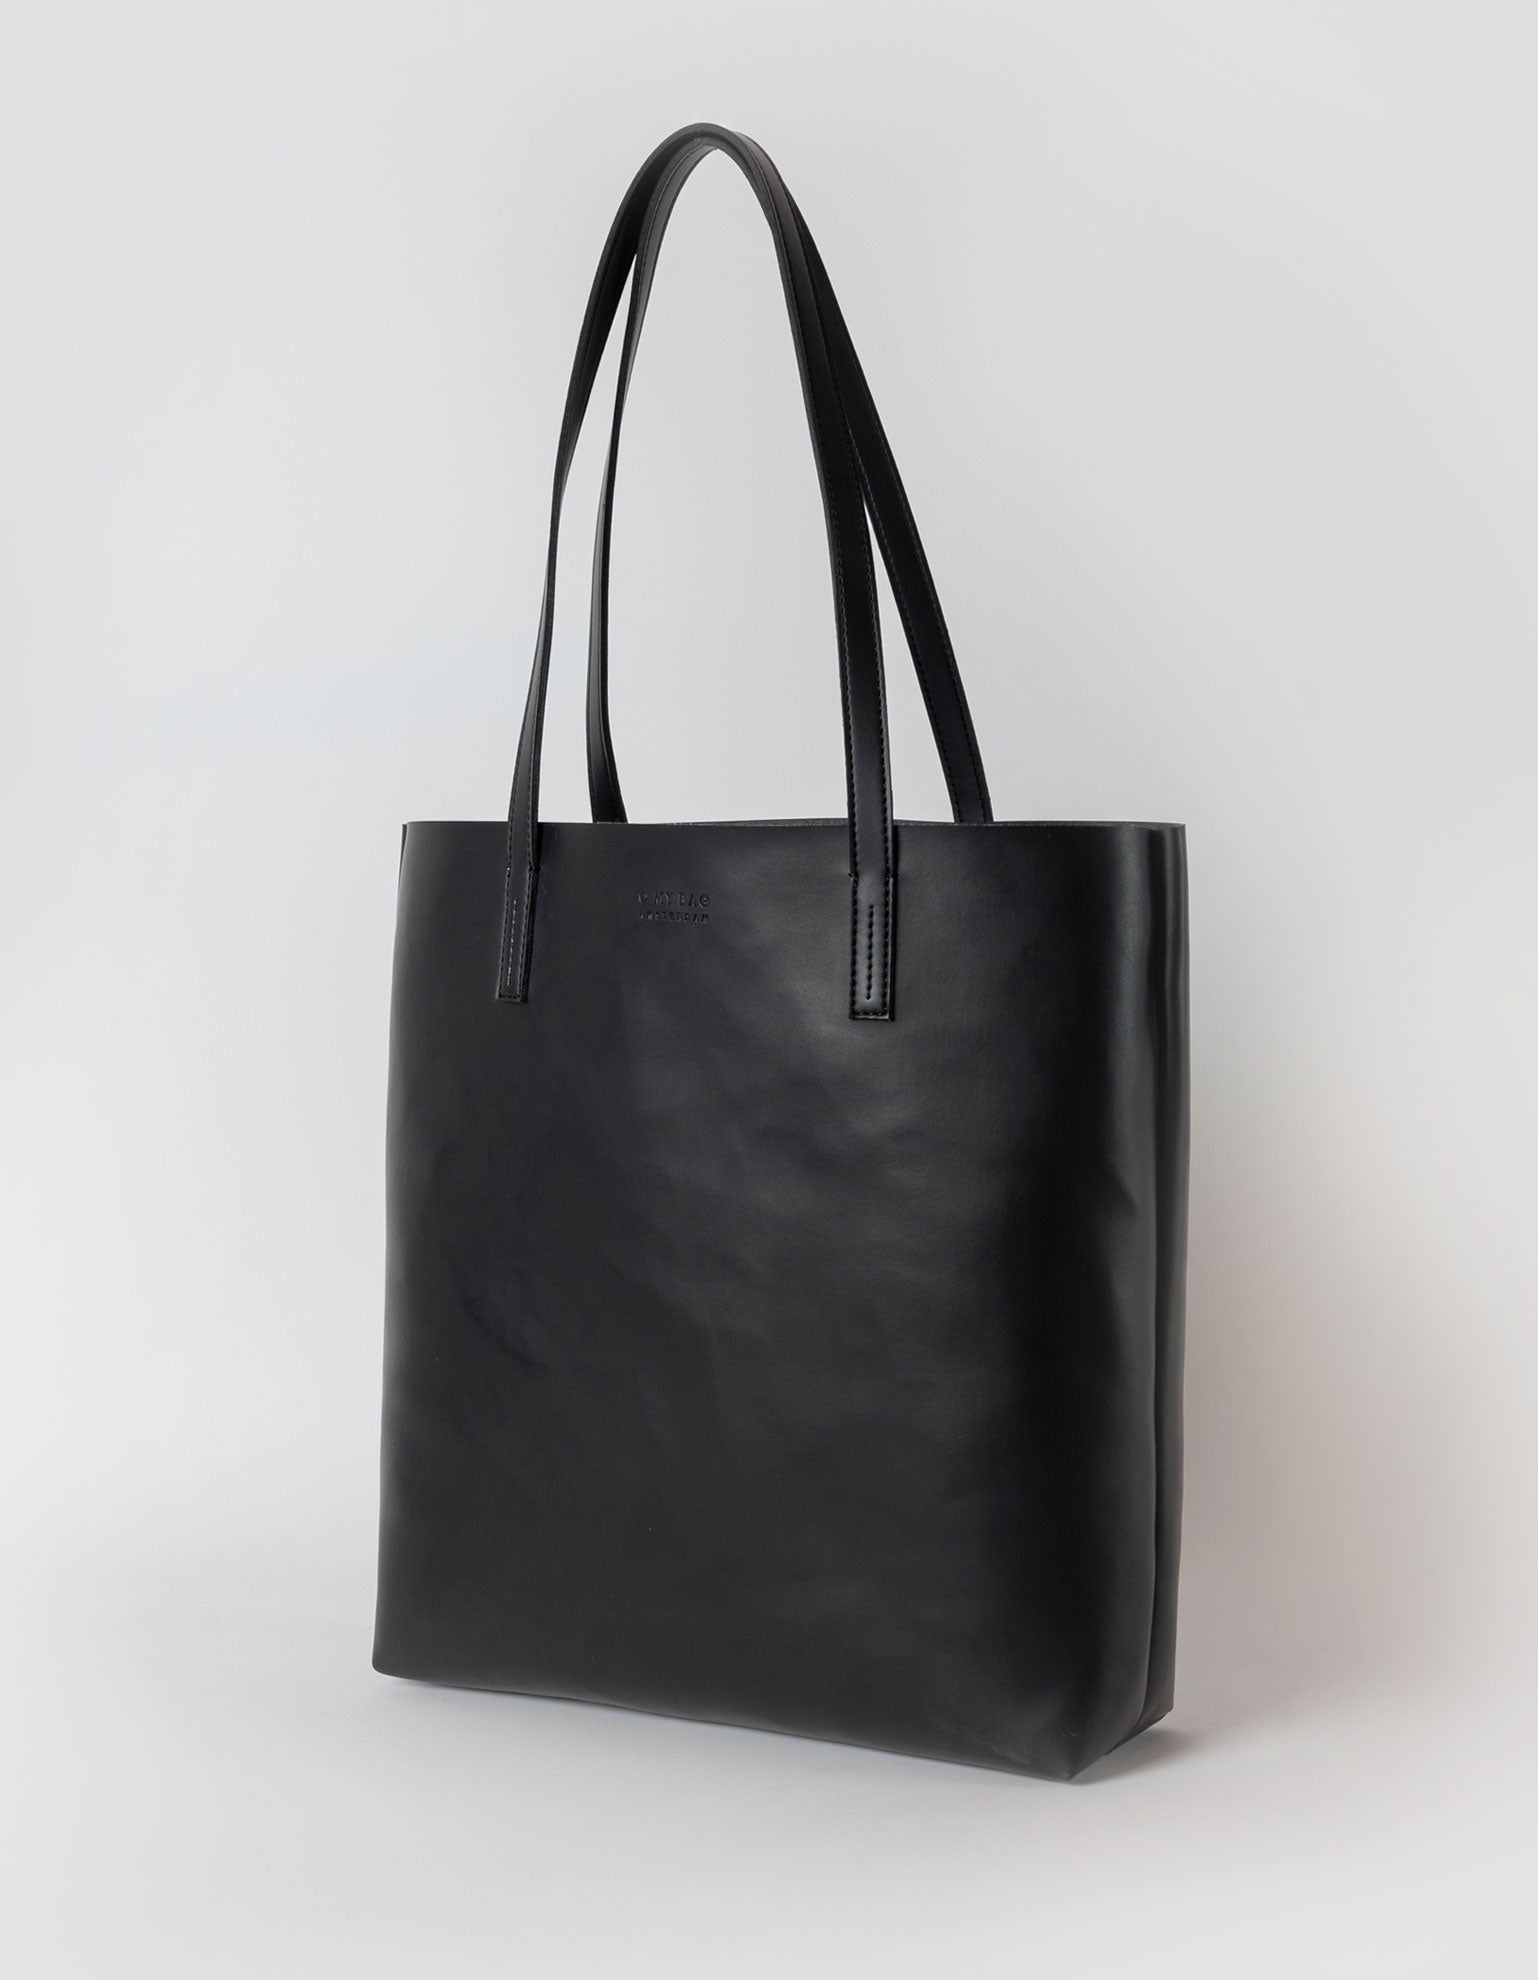 Georgia Tote in black apple leather. Side product image.